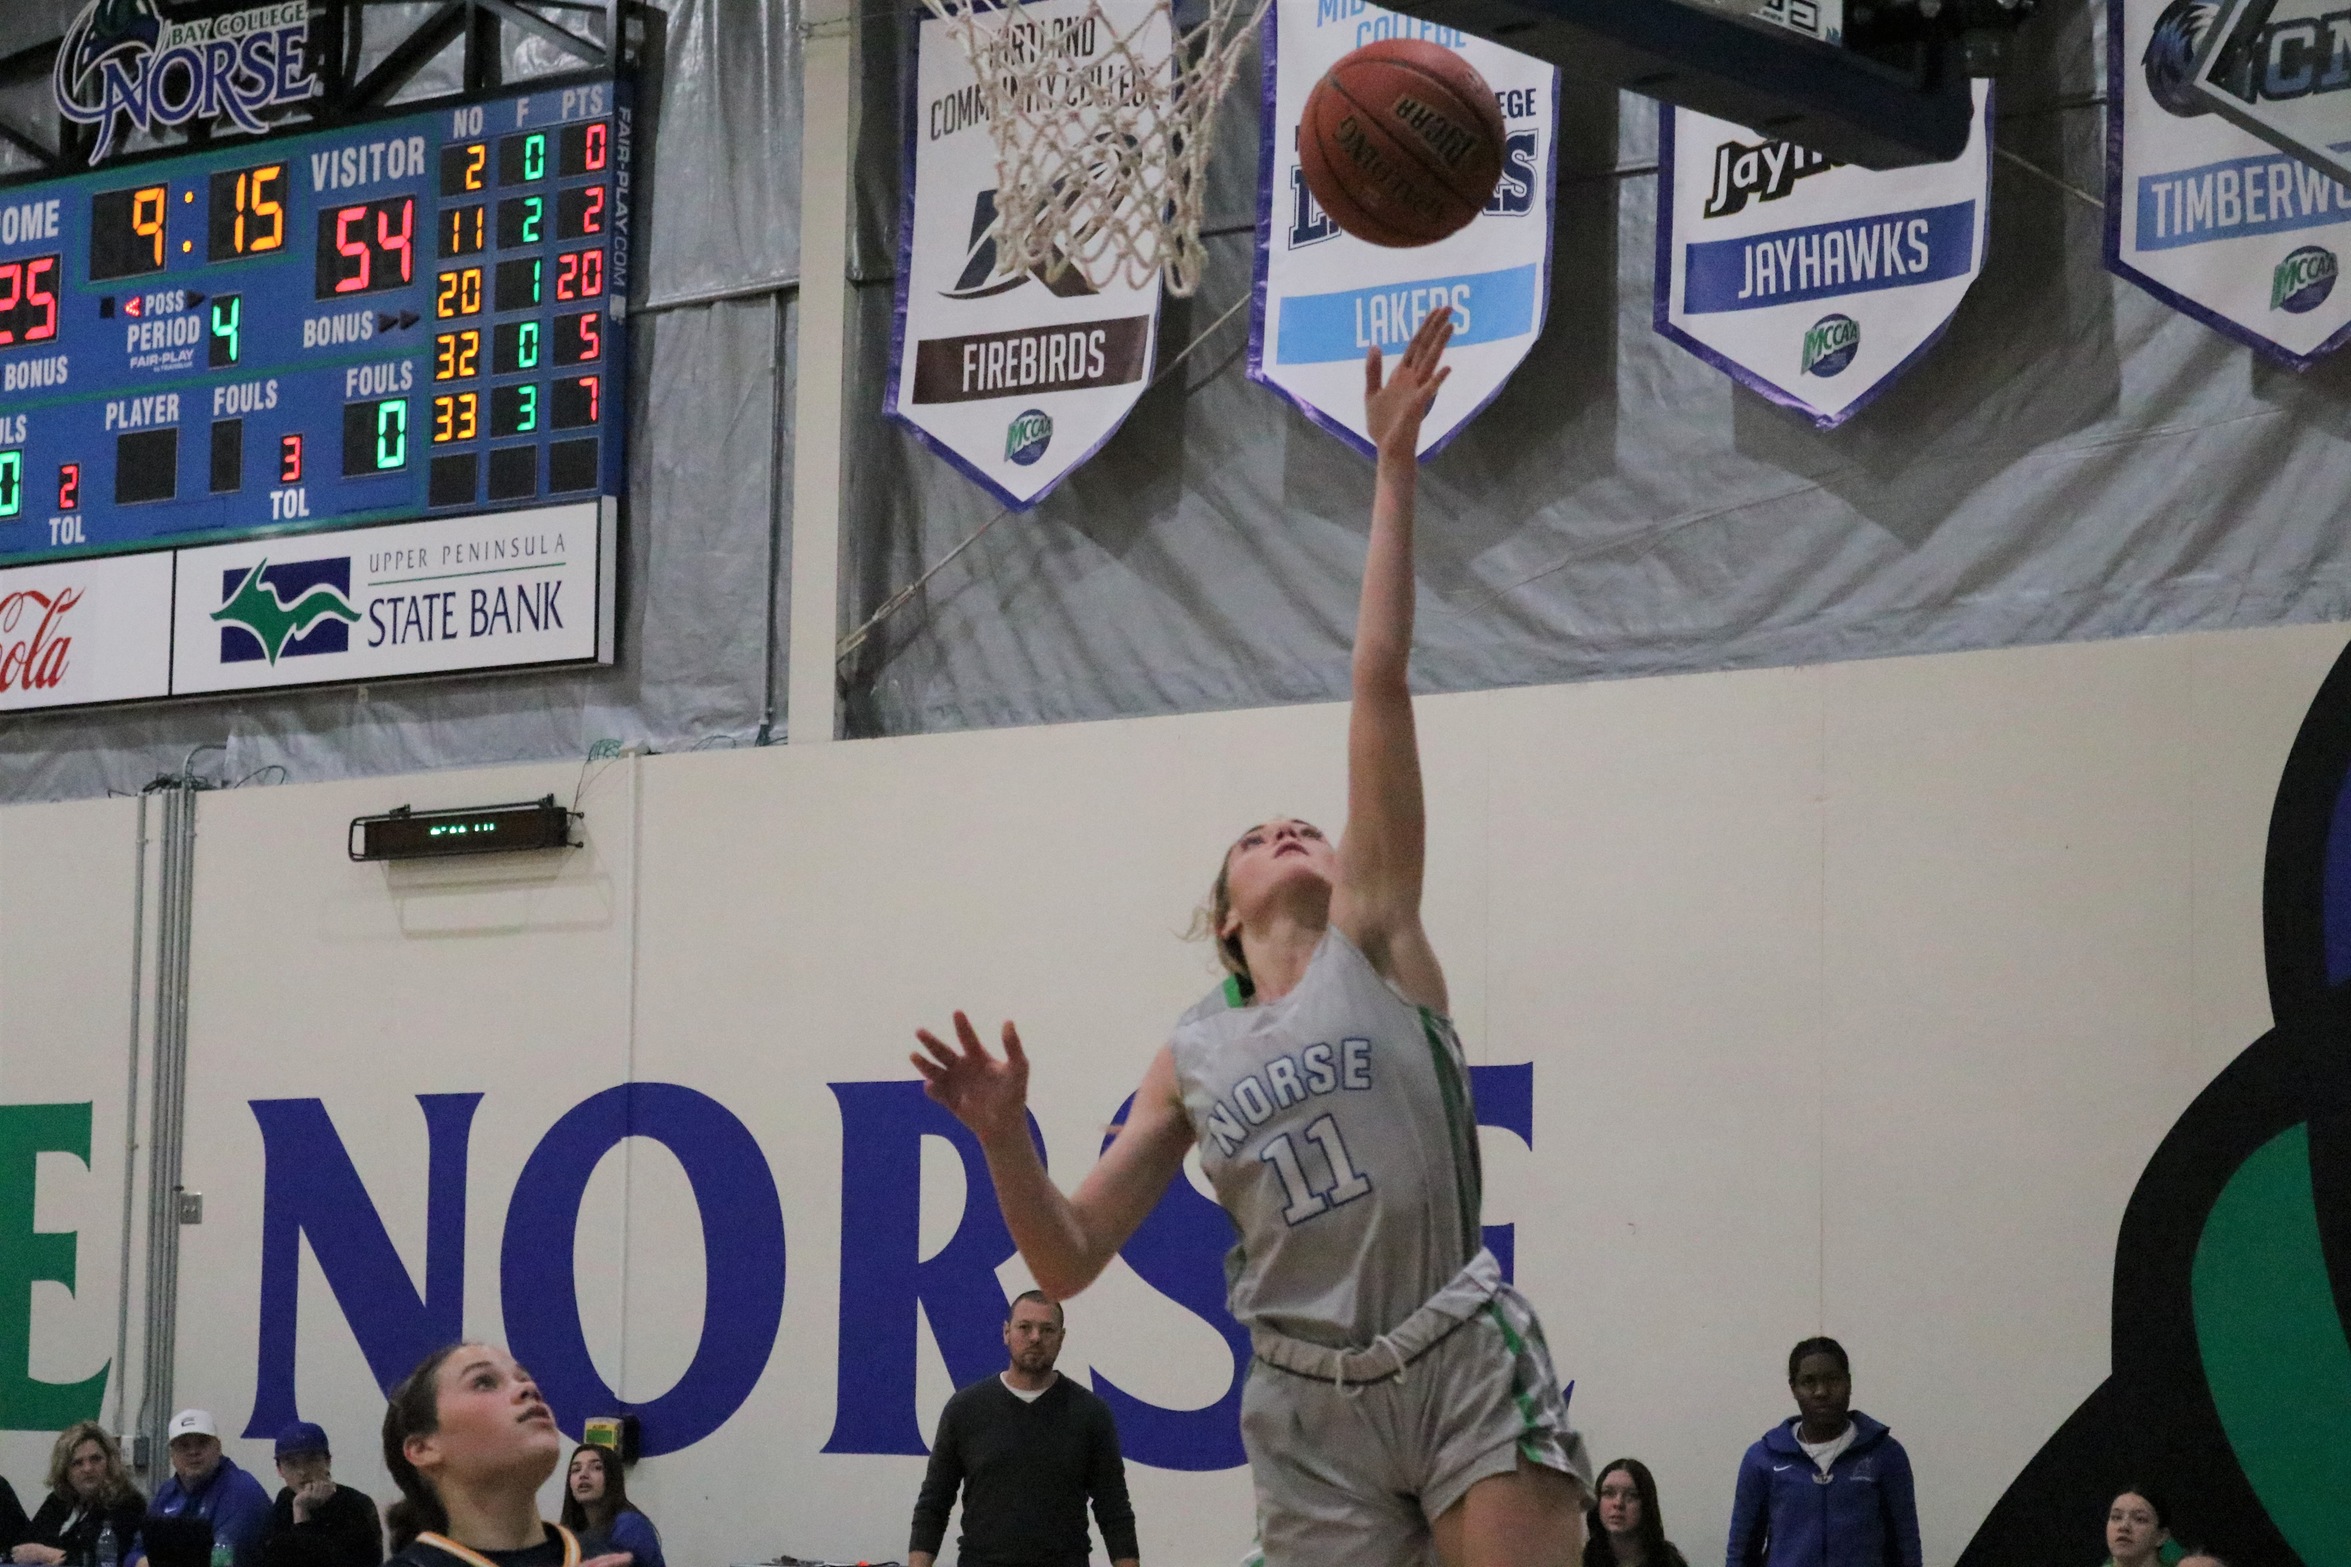 Alyssa Cretton watches with an outstretched hand as the layup she has just released goes up towards the basket